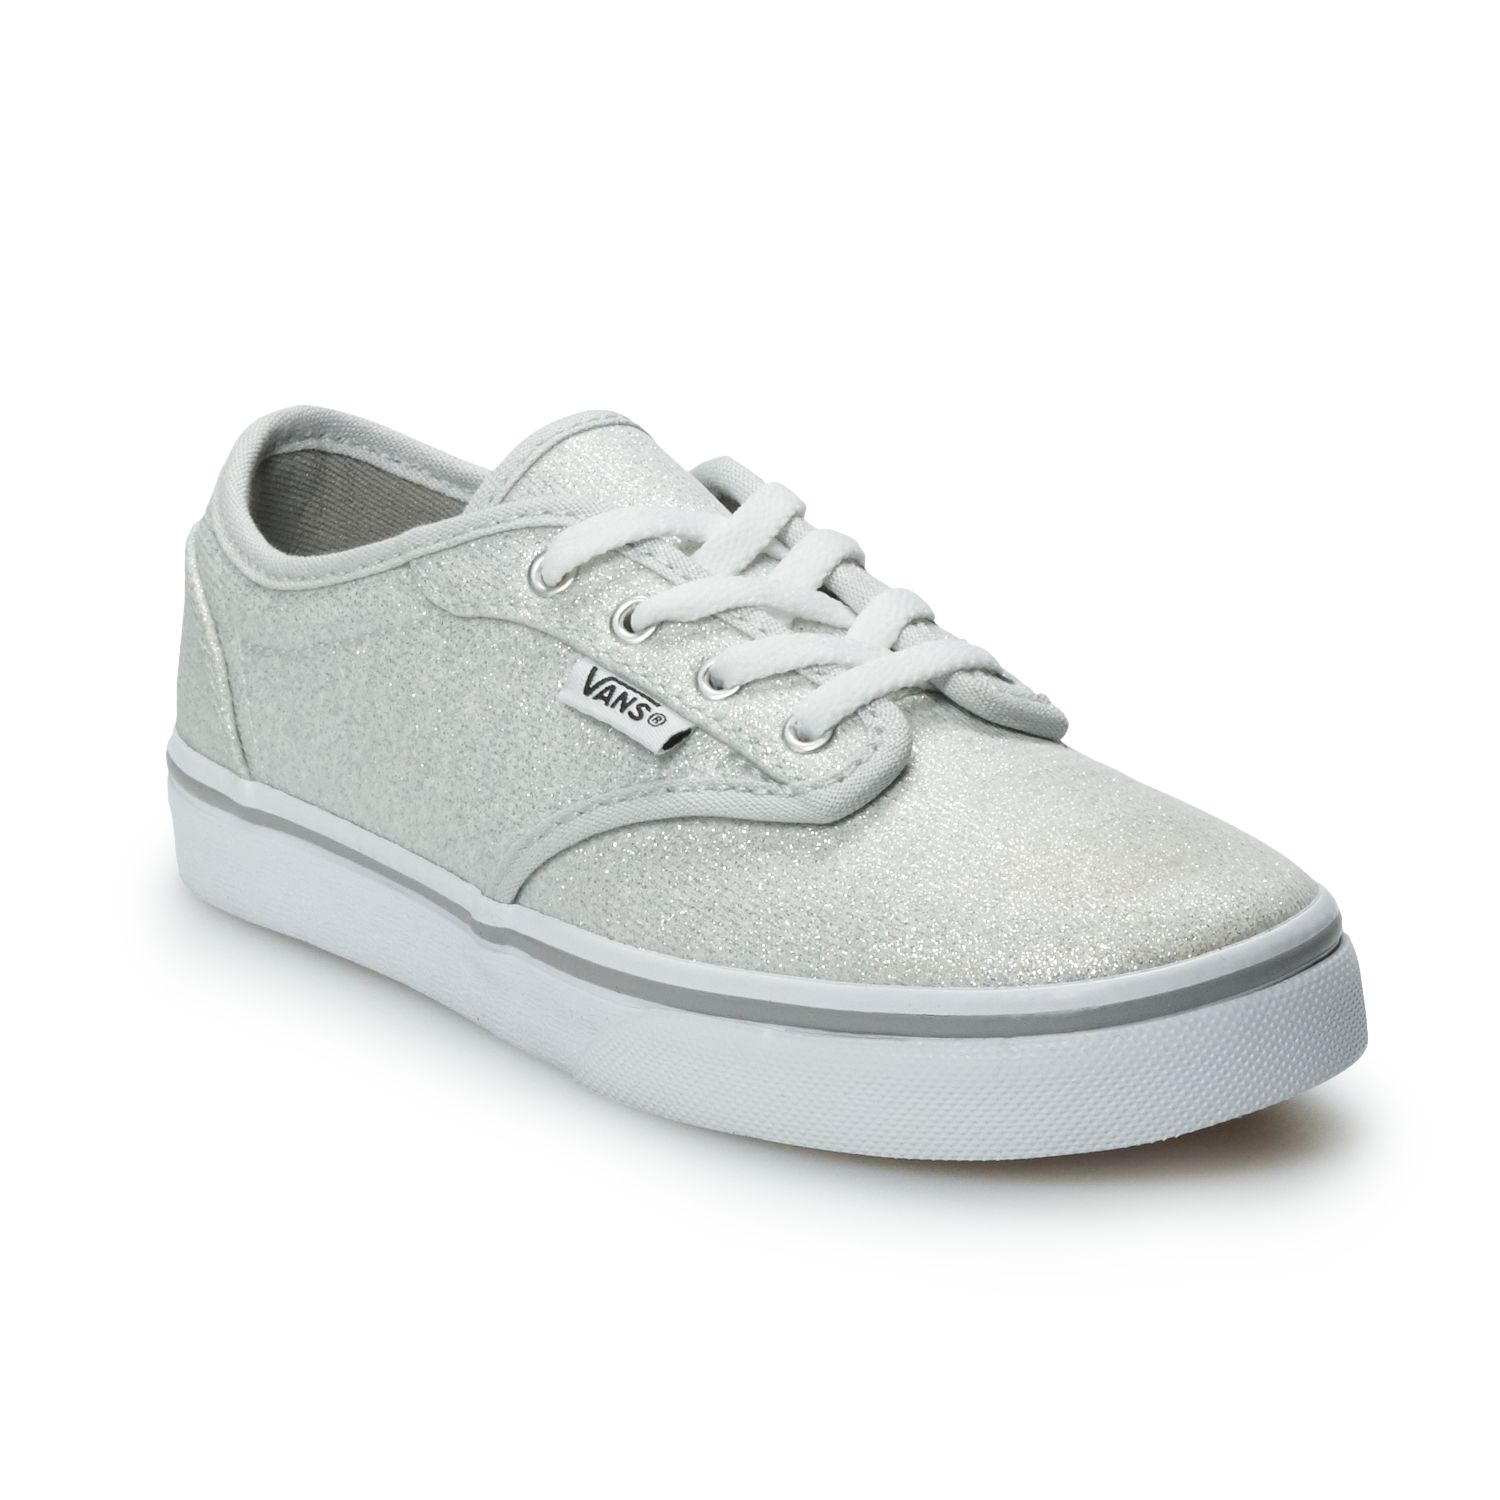 Vans® Atwood Low Girls' Skate Shoes